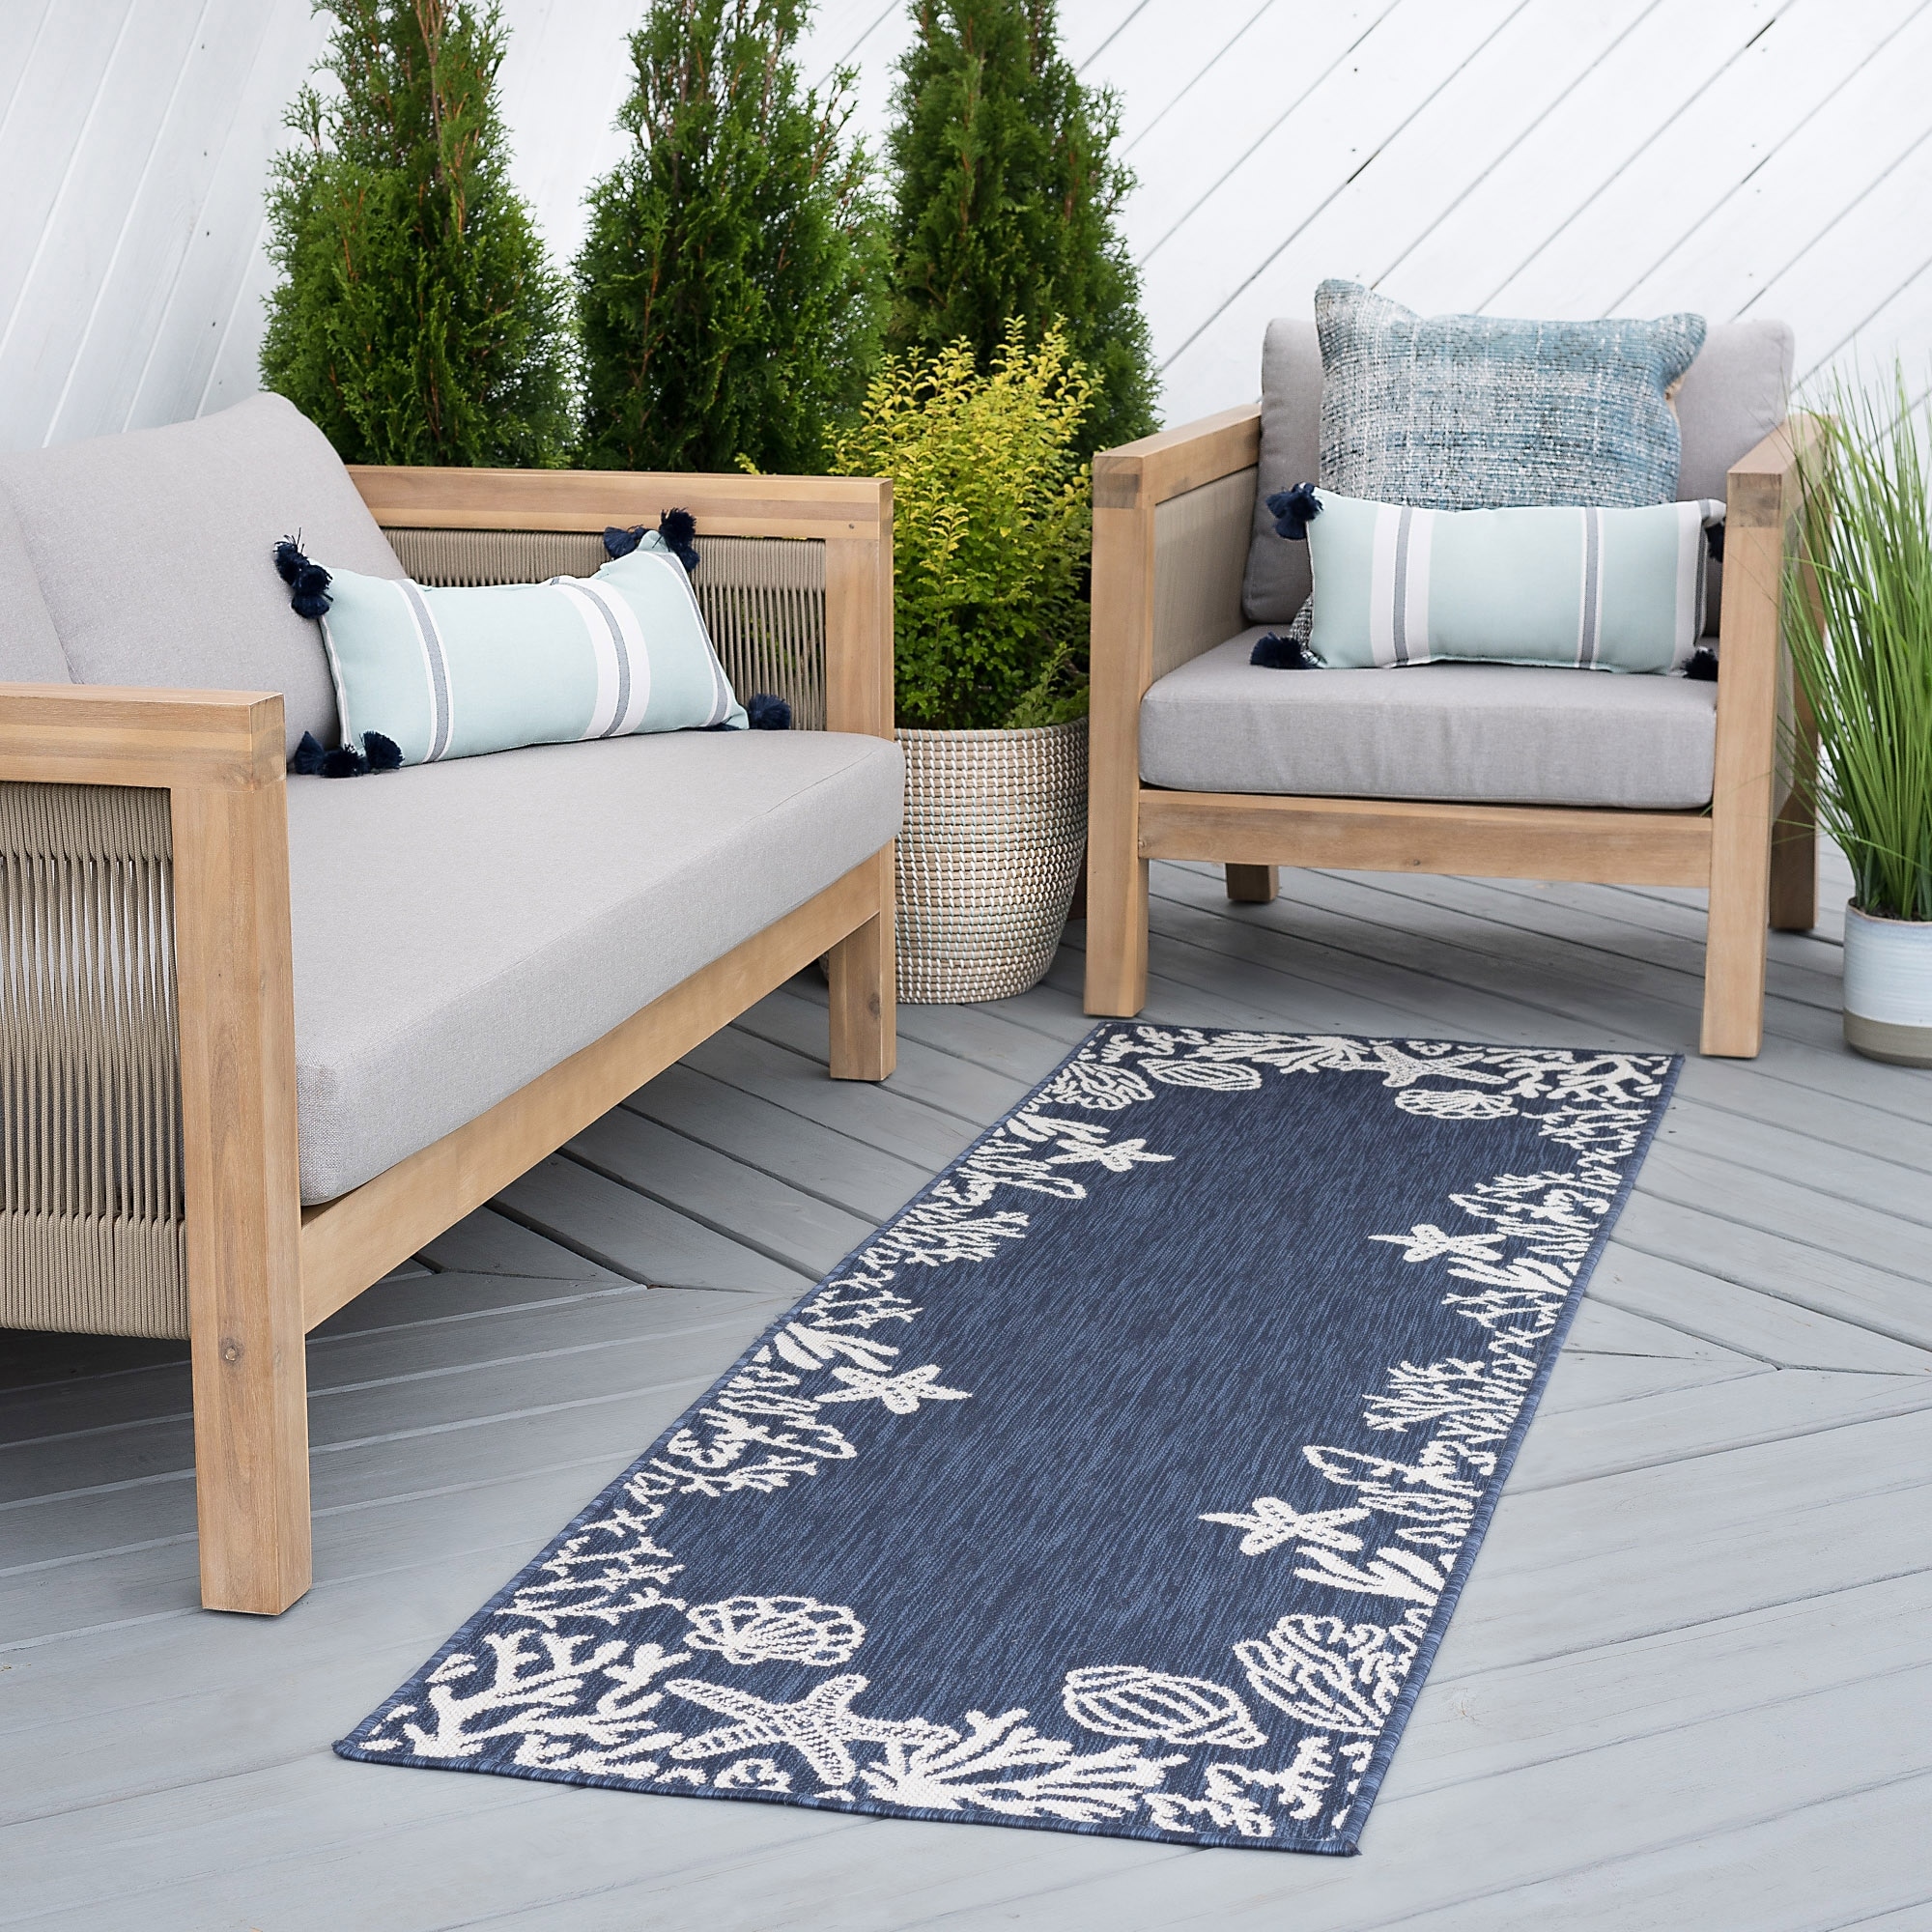 https://ak1.ostkcdn.com/images/products/is/images/direct/6c682c52ec4714cd9417c74eb232b170595d613d/Alise-Rugs-Exo-Novelty-Coastal-Indoor-Outdoor-Area-Rug.jpg